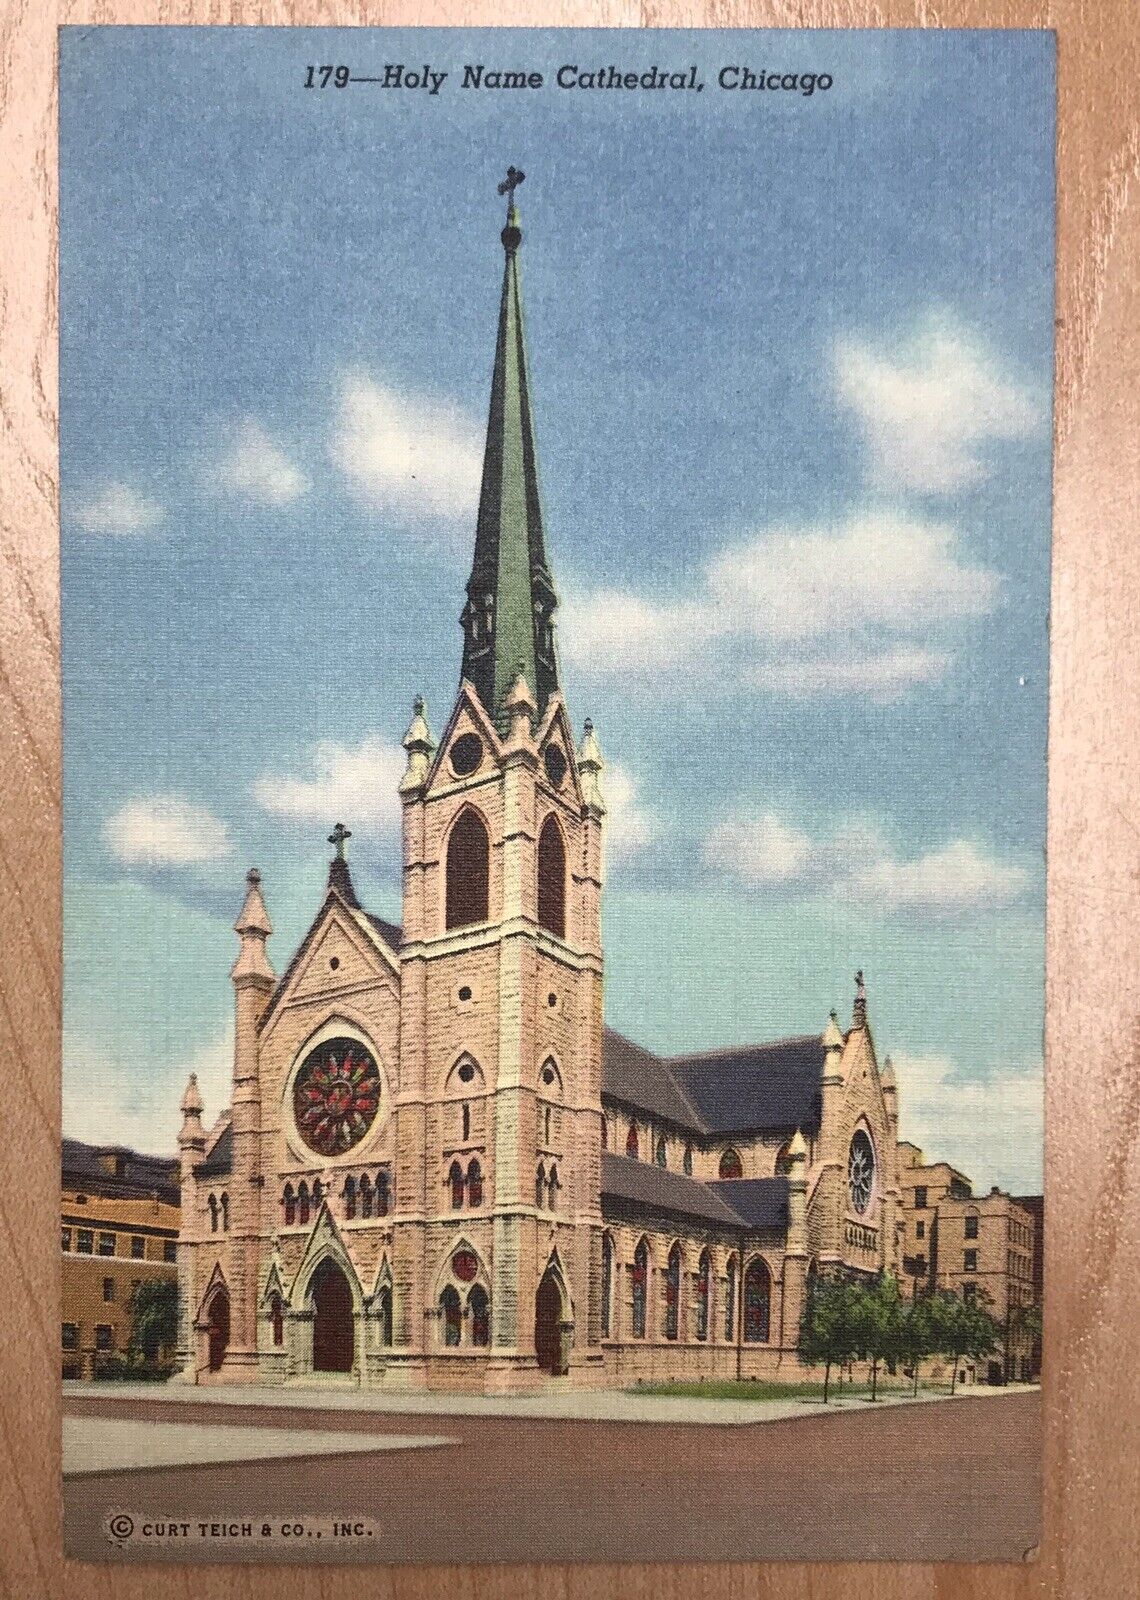 Vintage 1930's Holy Name Cathedral, Chicago Illinois IL Postcard Linen Antique